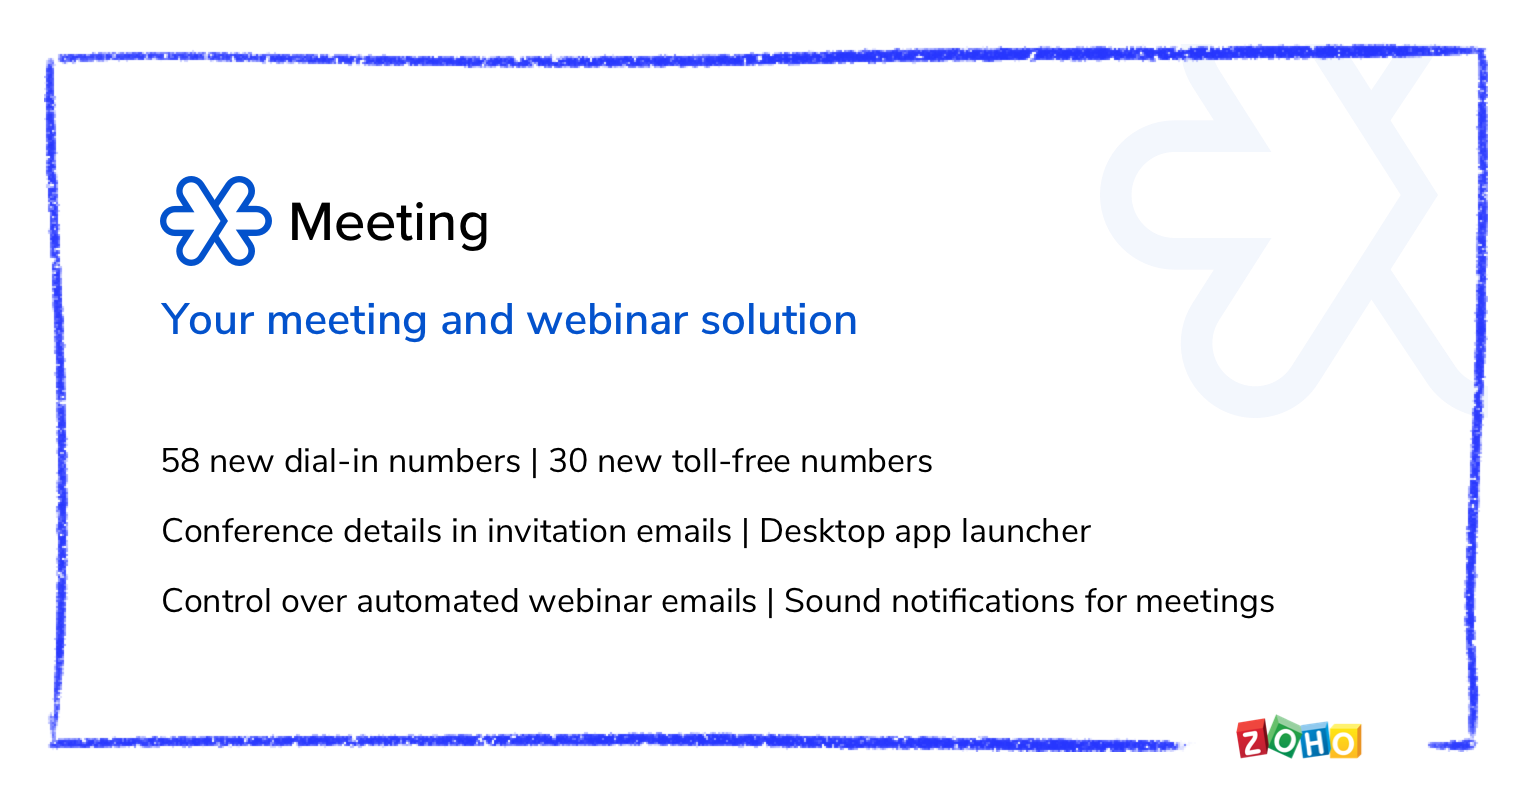 New dial-in and toll-free numbers, Conference details in invitation emails, Control over automated webinar emails, and more from Zoho Meeting.